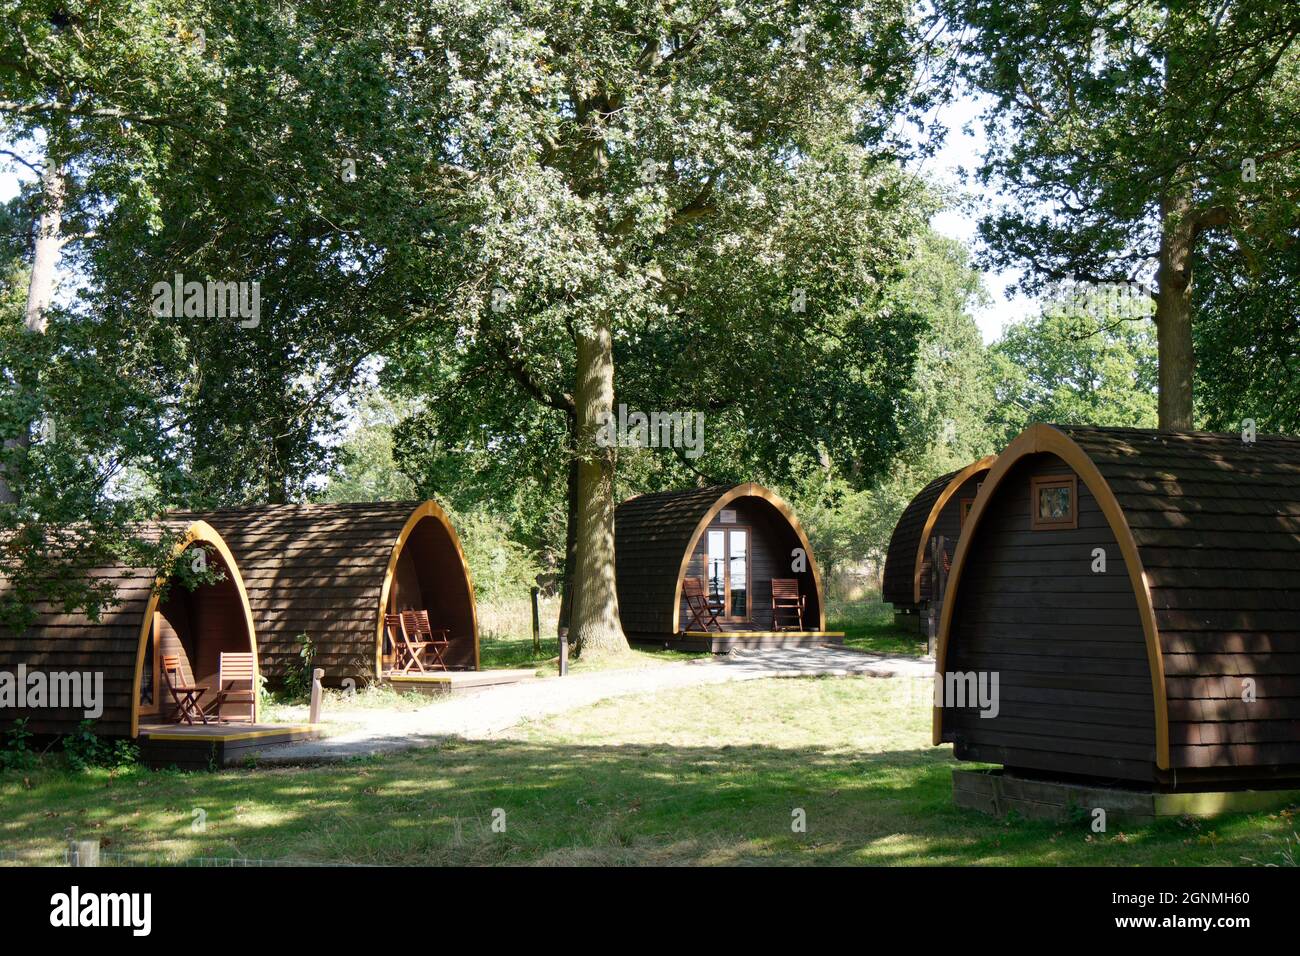 Dunstable, Bedfordshire, England, September 02 2021: The wooden cabin 'lookout lodge' at ZSL Whipsnade Zoo. Stock Photo